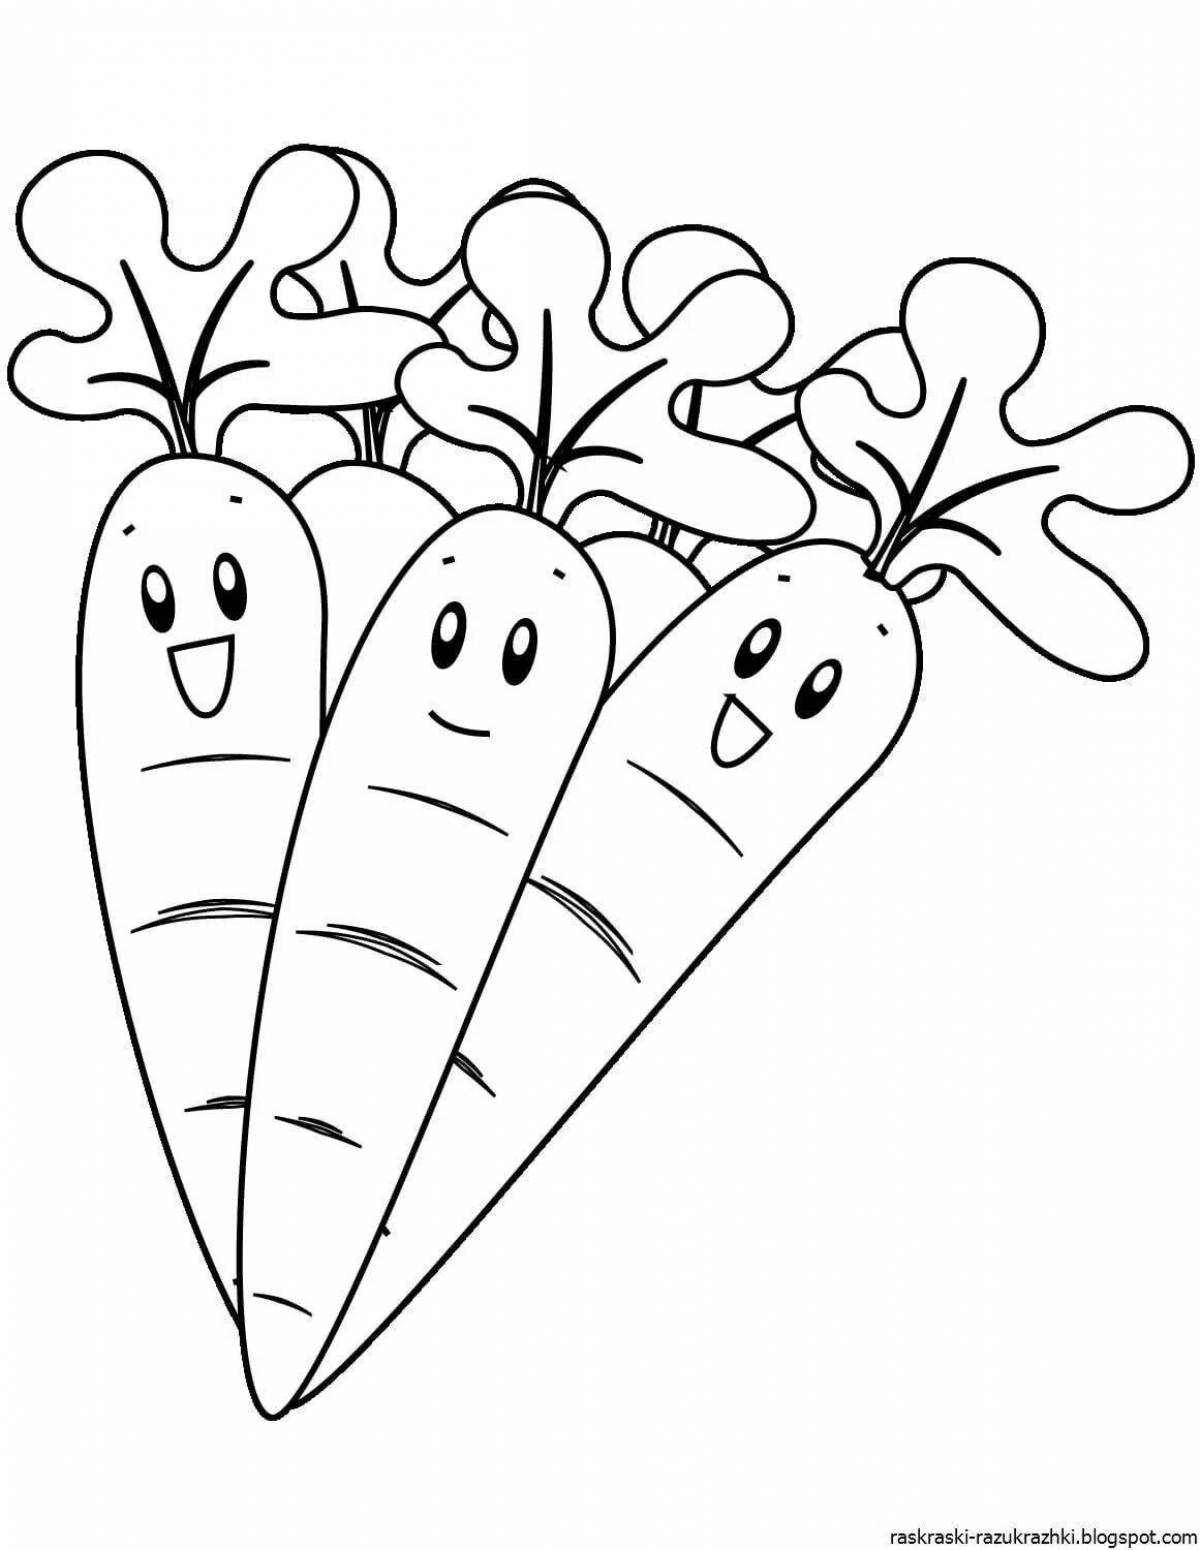 Carrot drawing for kids #4